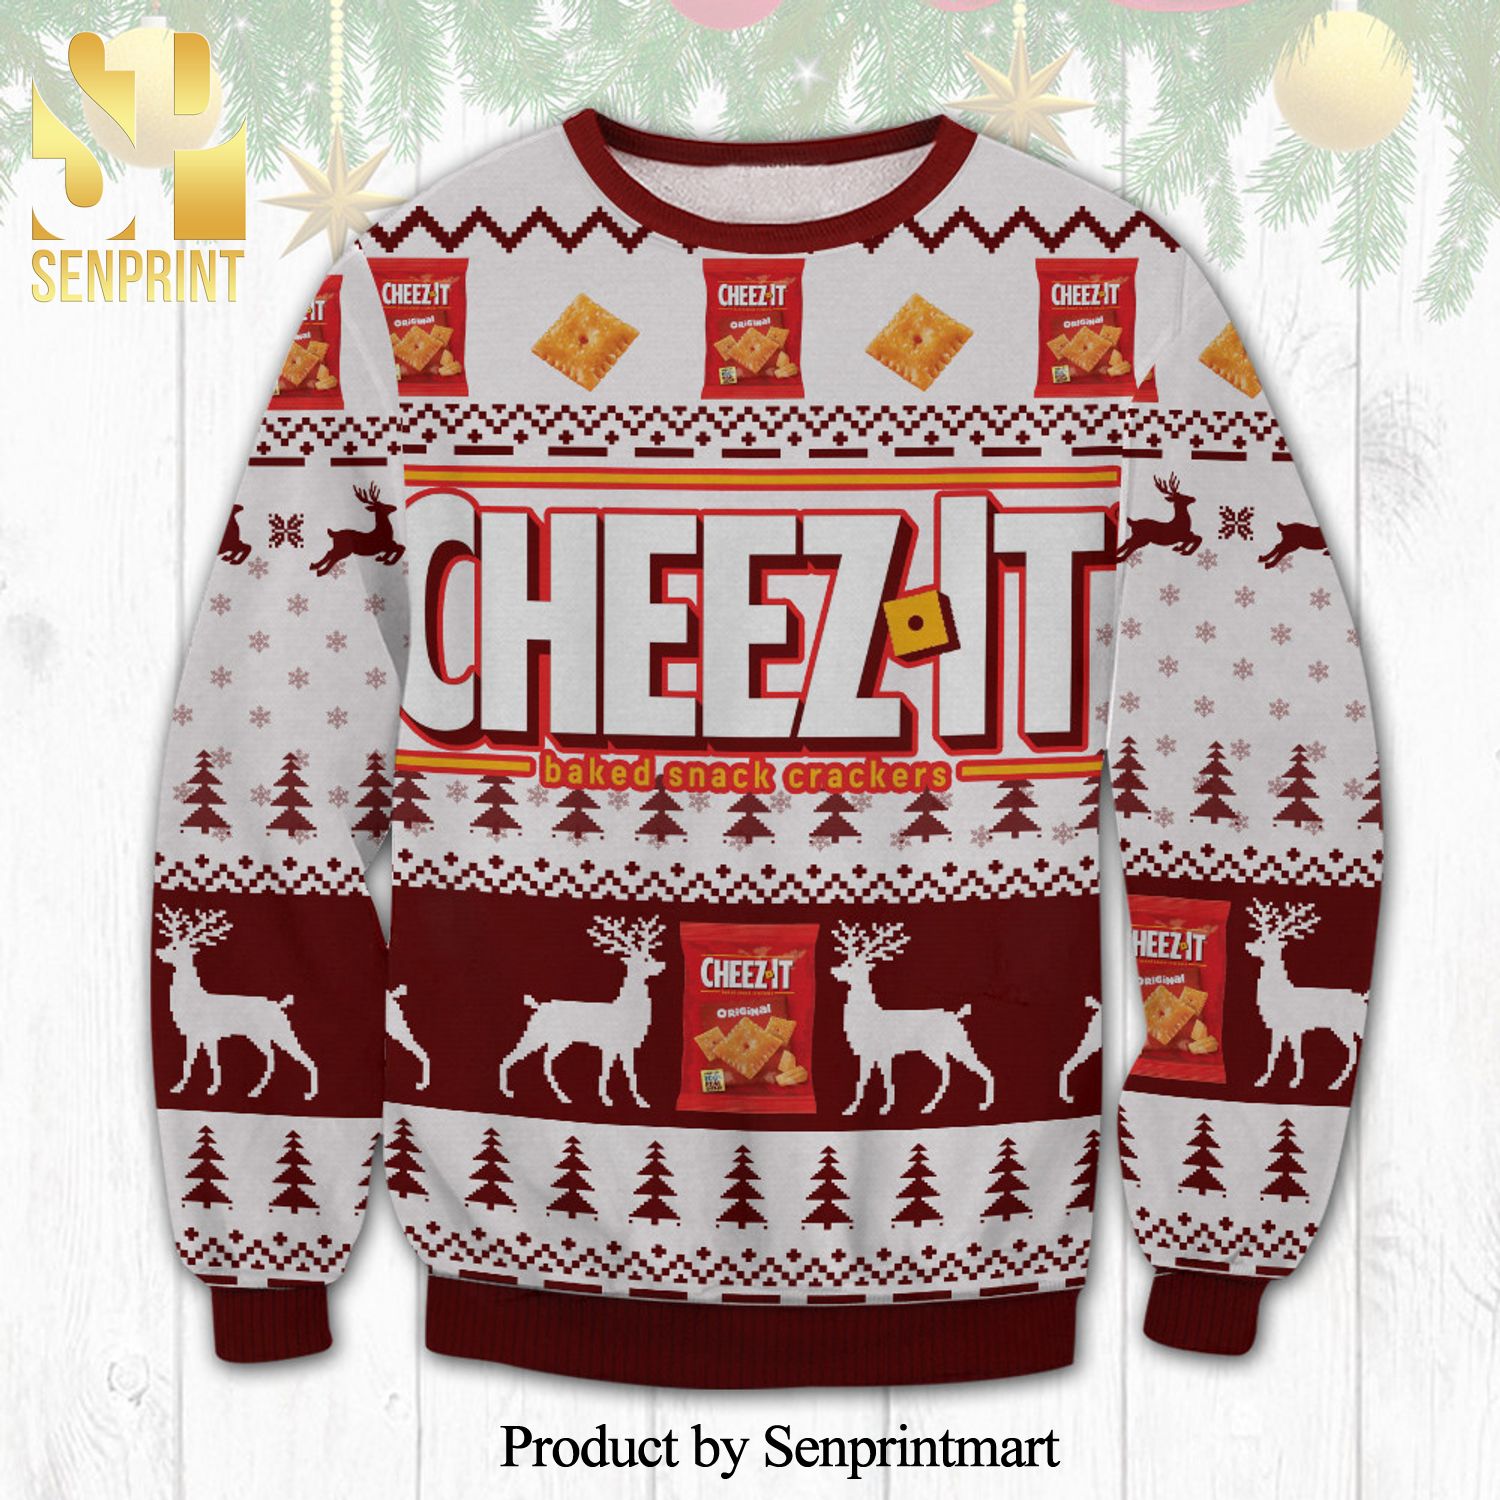 CHEEZ-IT Baked Snack Crackers Reindeer Knitted Ugly Christmas Sweater